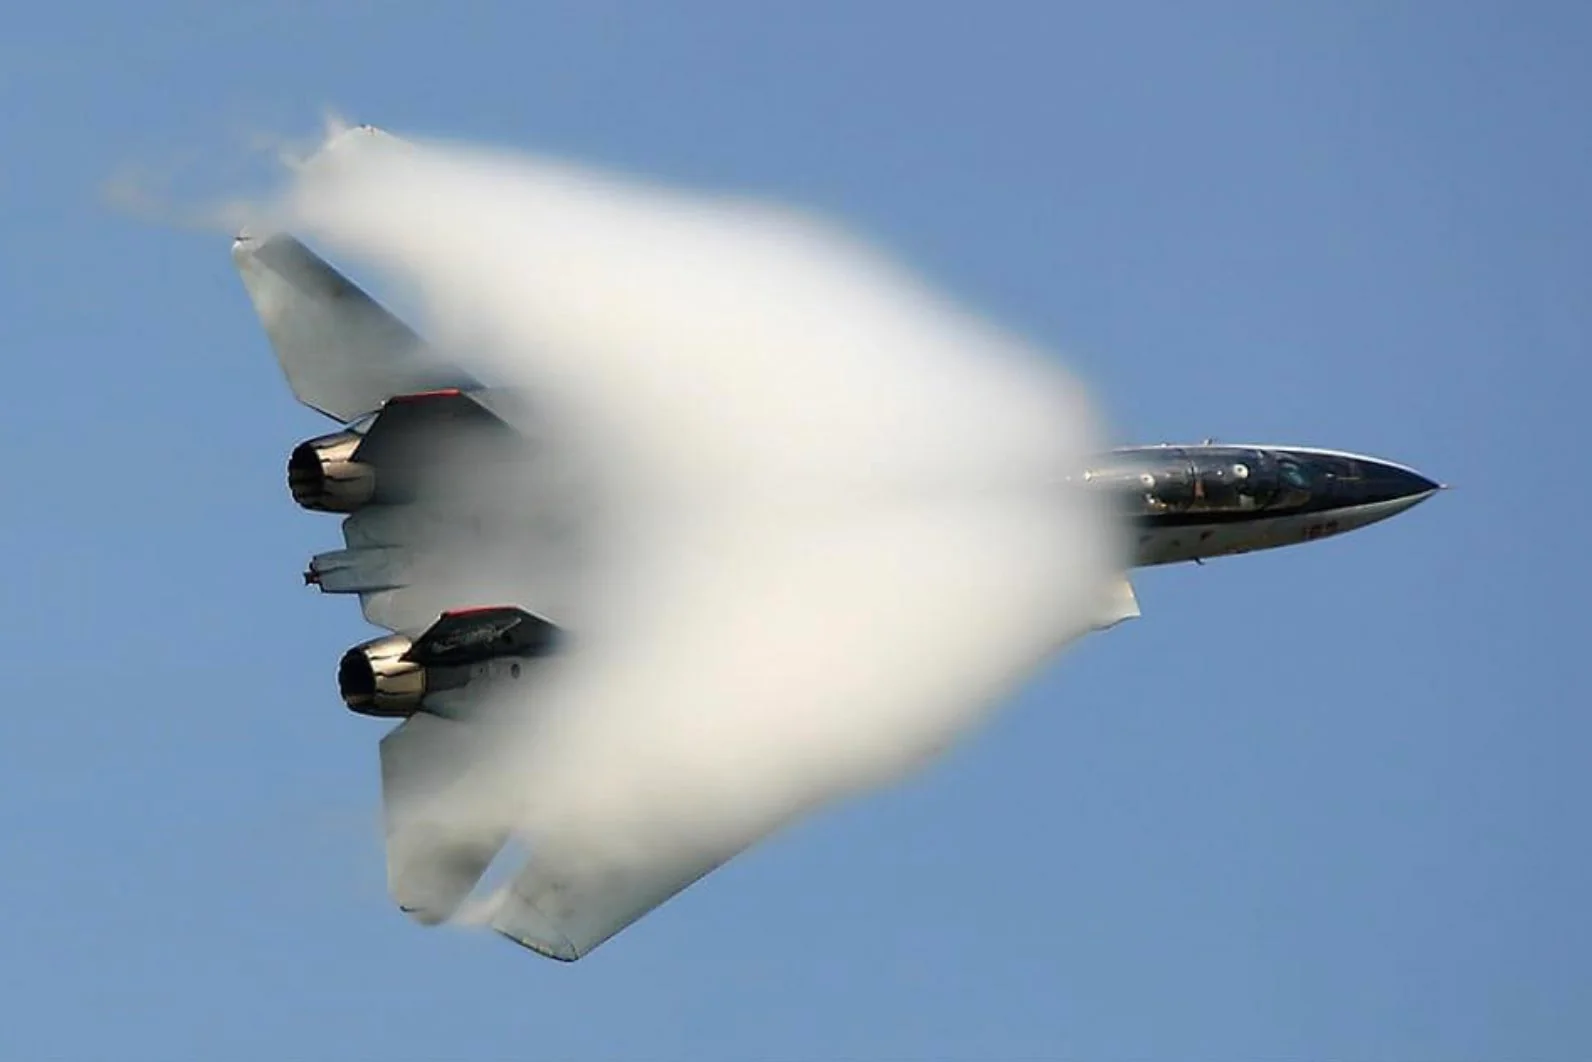 The F14 Tomcat reaches the speed of sound, producing a stunning vapor cone.